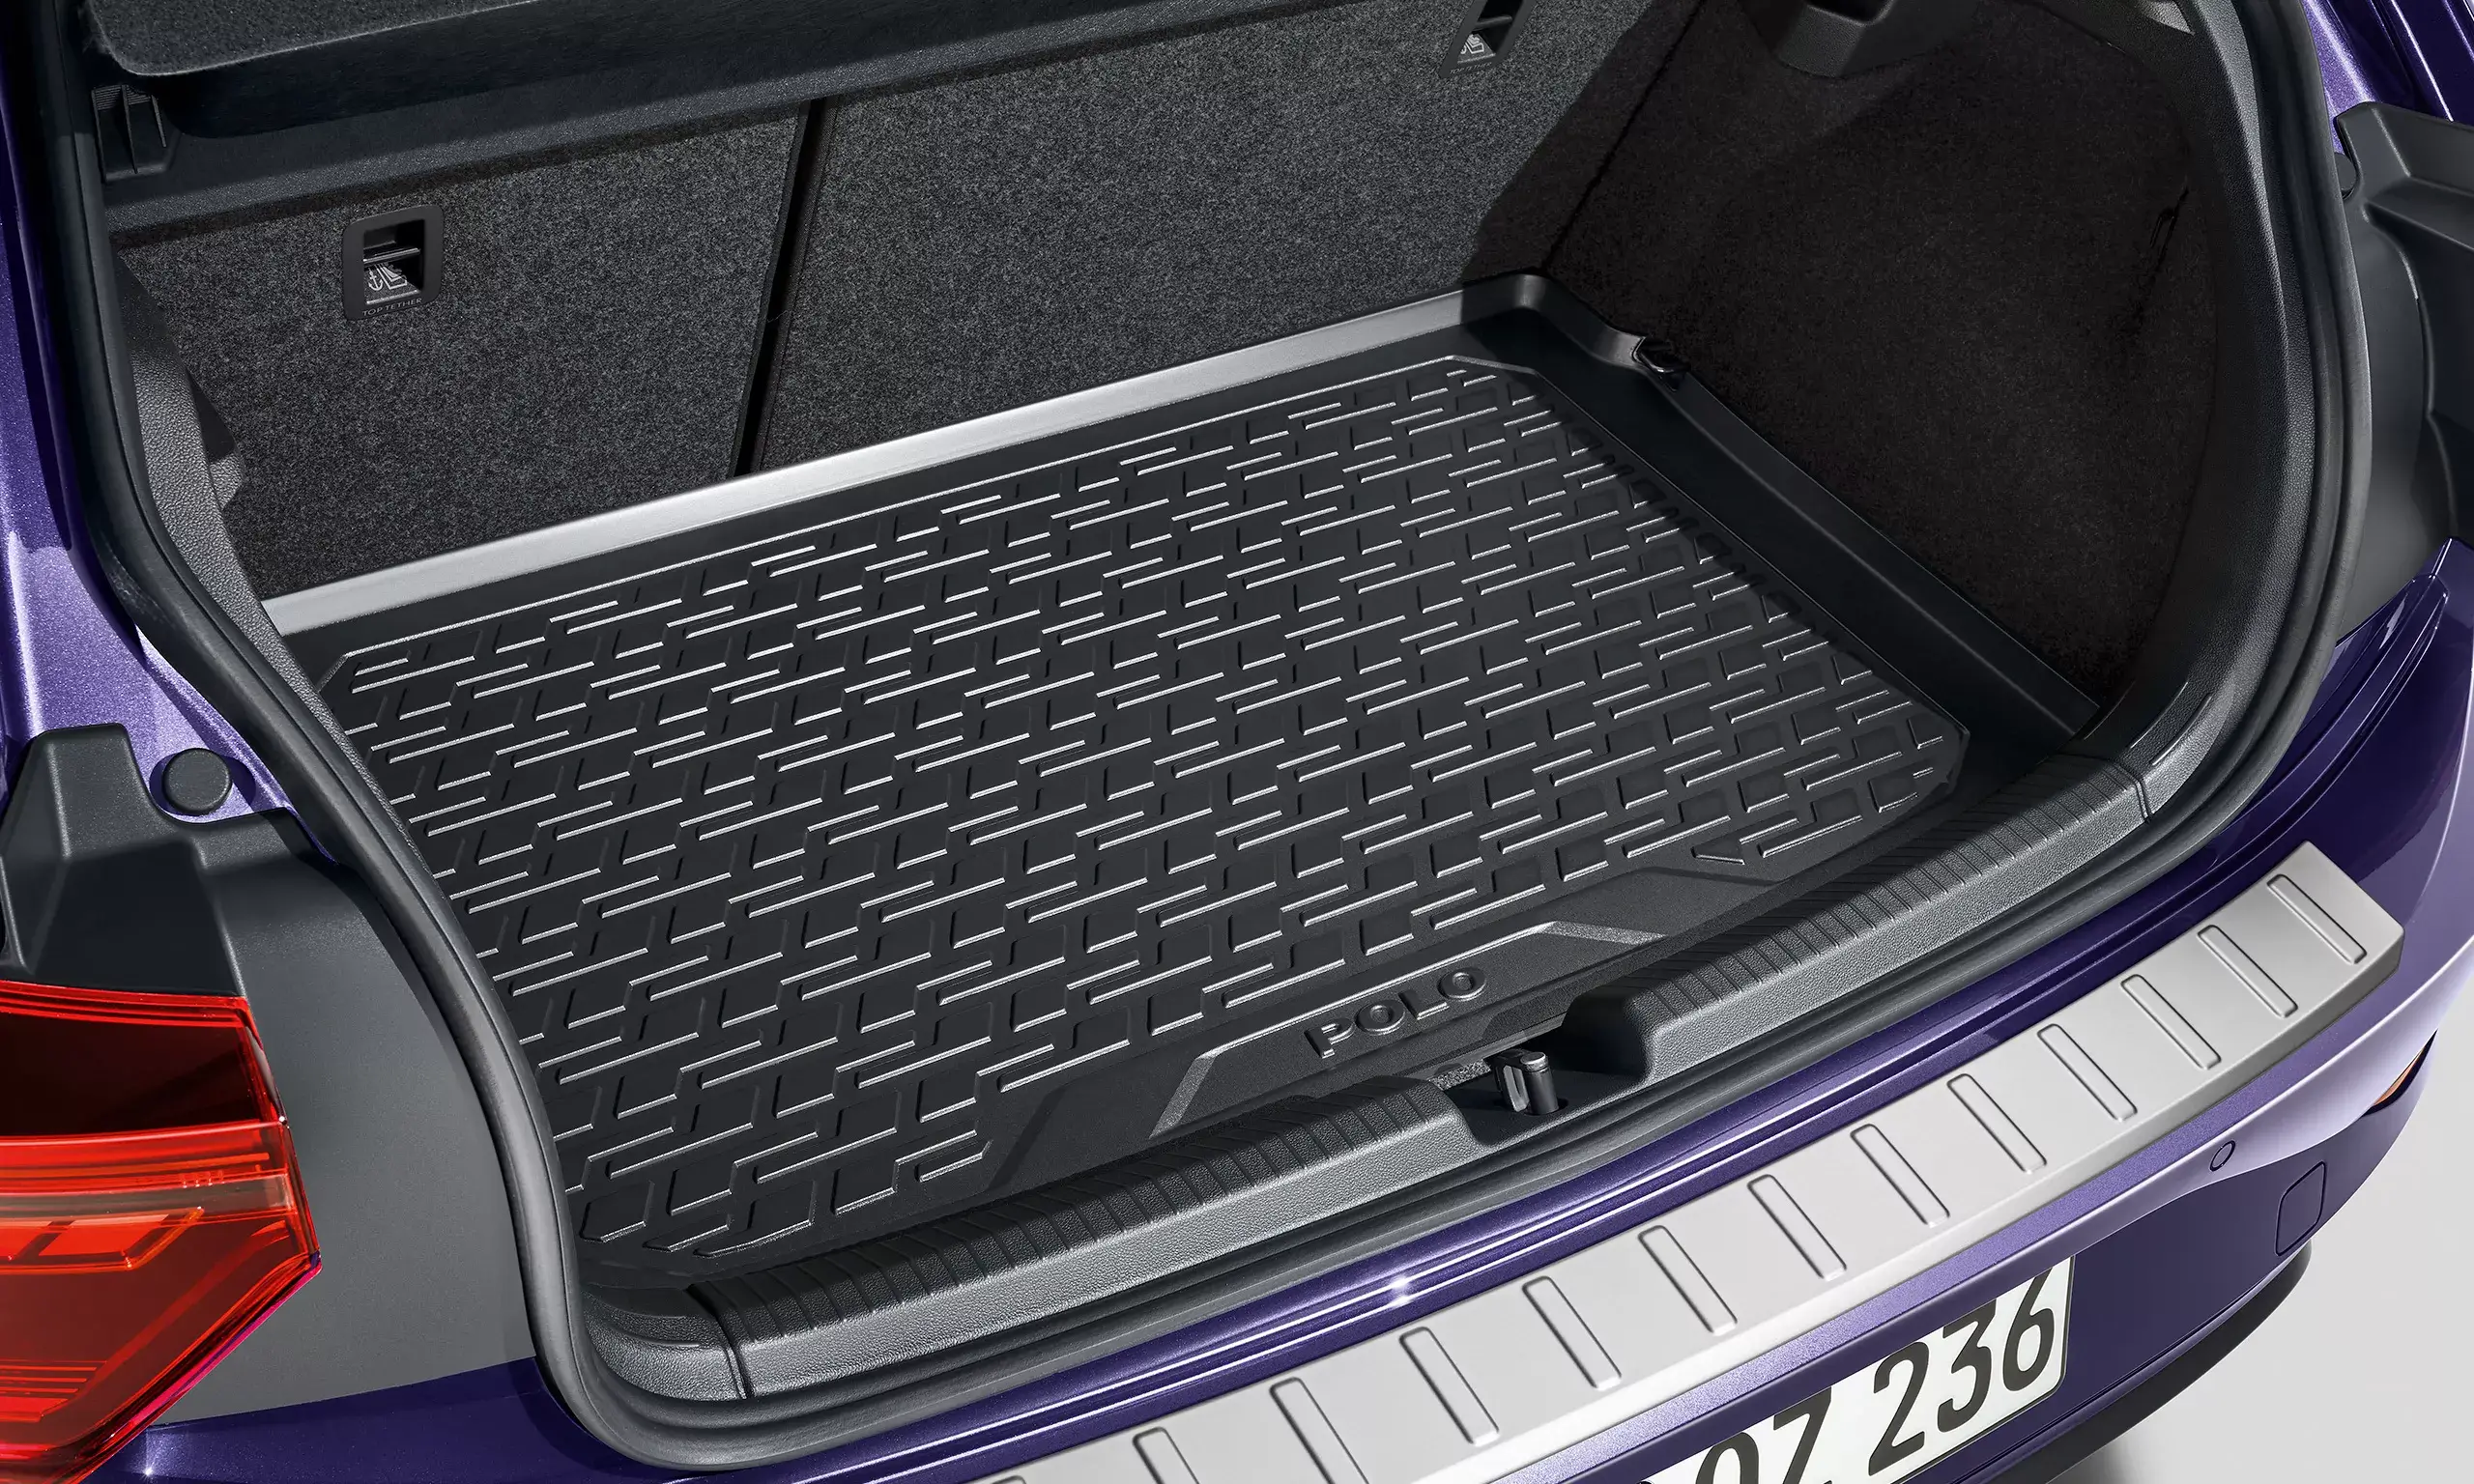 Luggage compartment tray Durable compartment Image